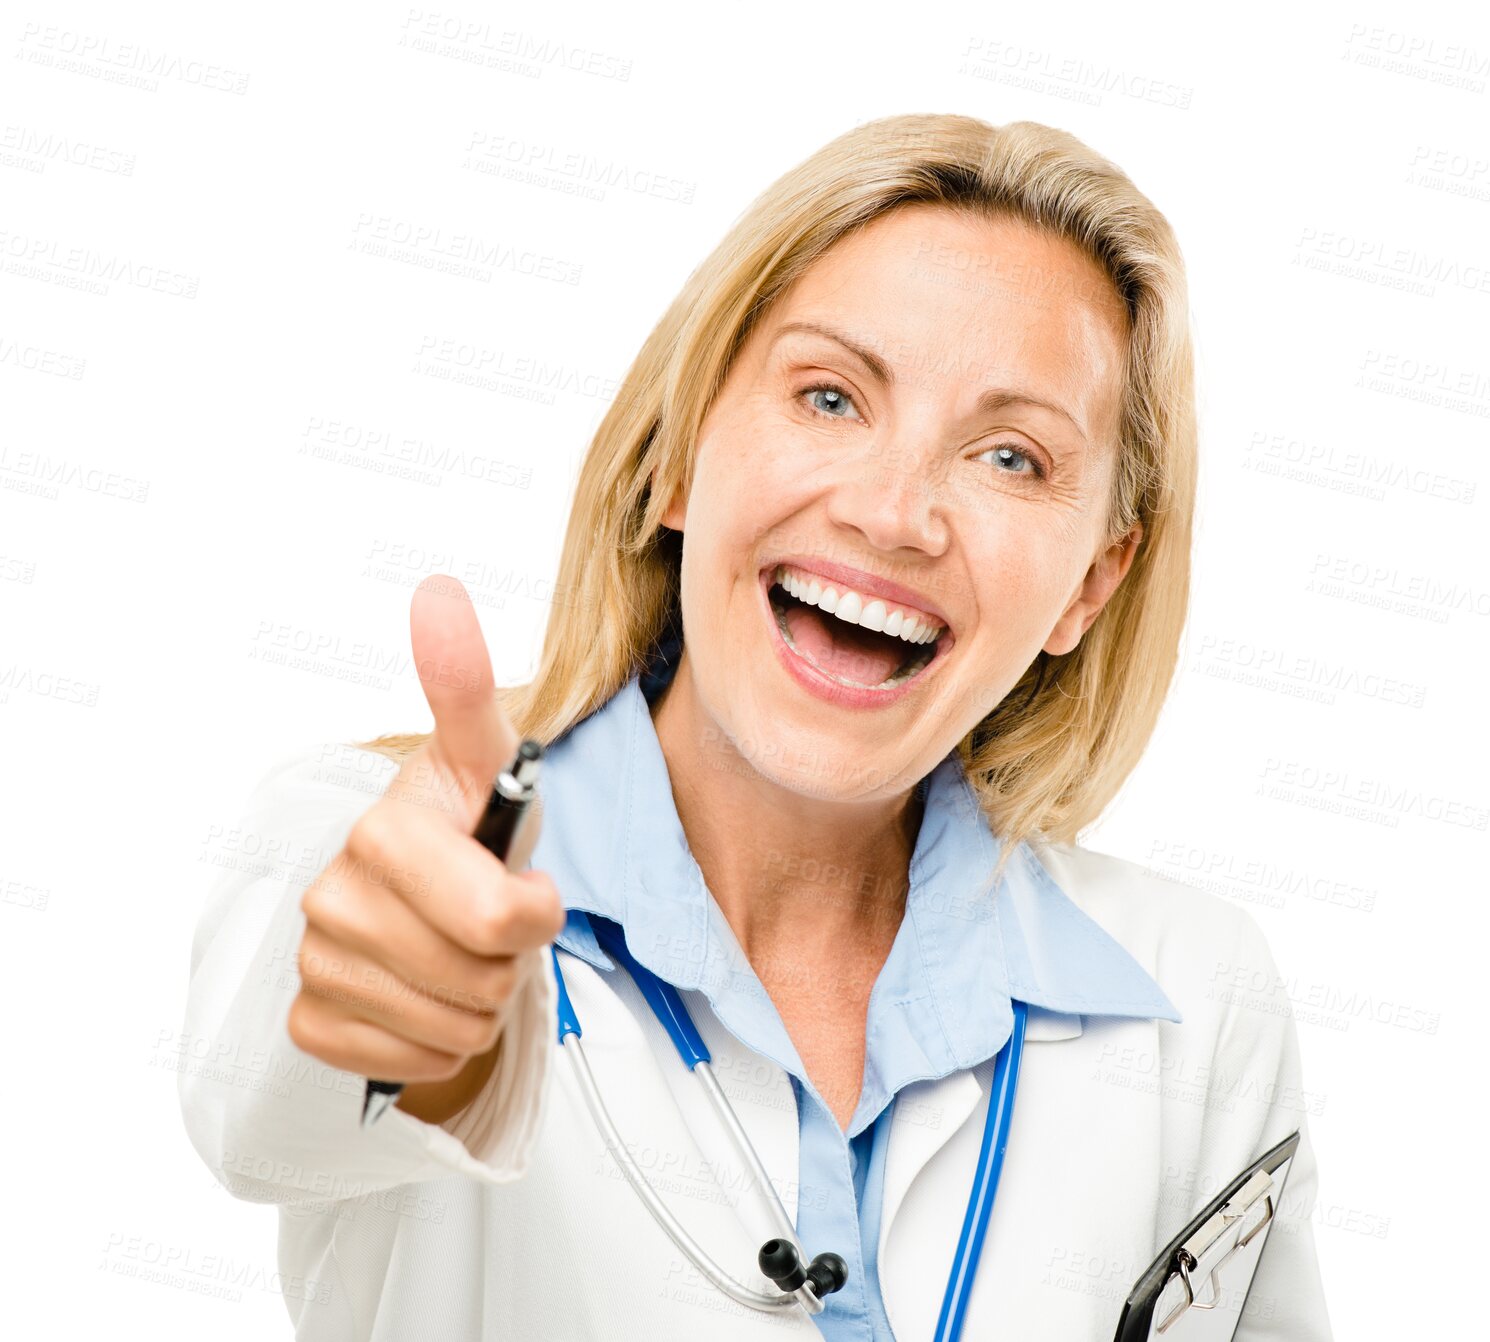 Buy stock photo Excited, woman and portrait of doctor with thumbs up for good news, approval and agreement. Happy, smile and female healthcare worker with satisfaction hand gesture by transparent png background.